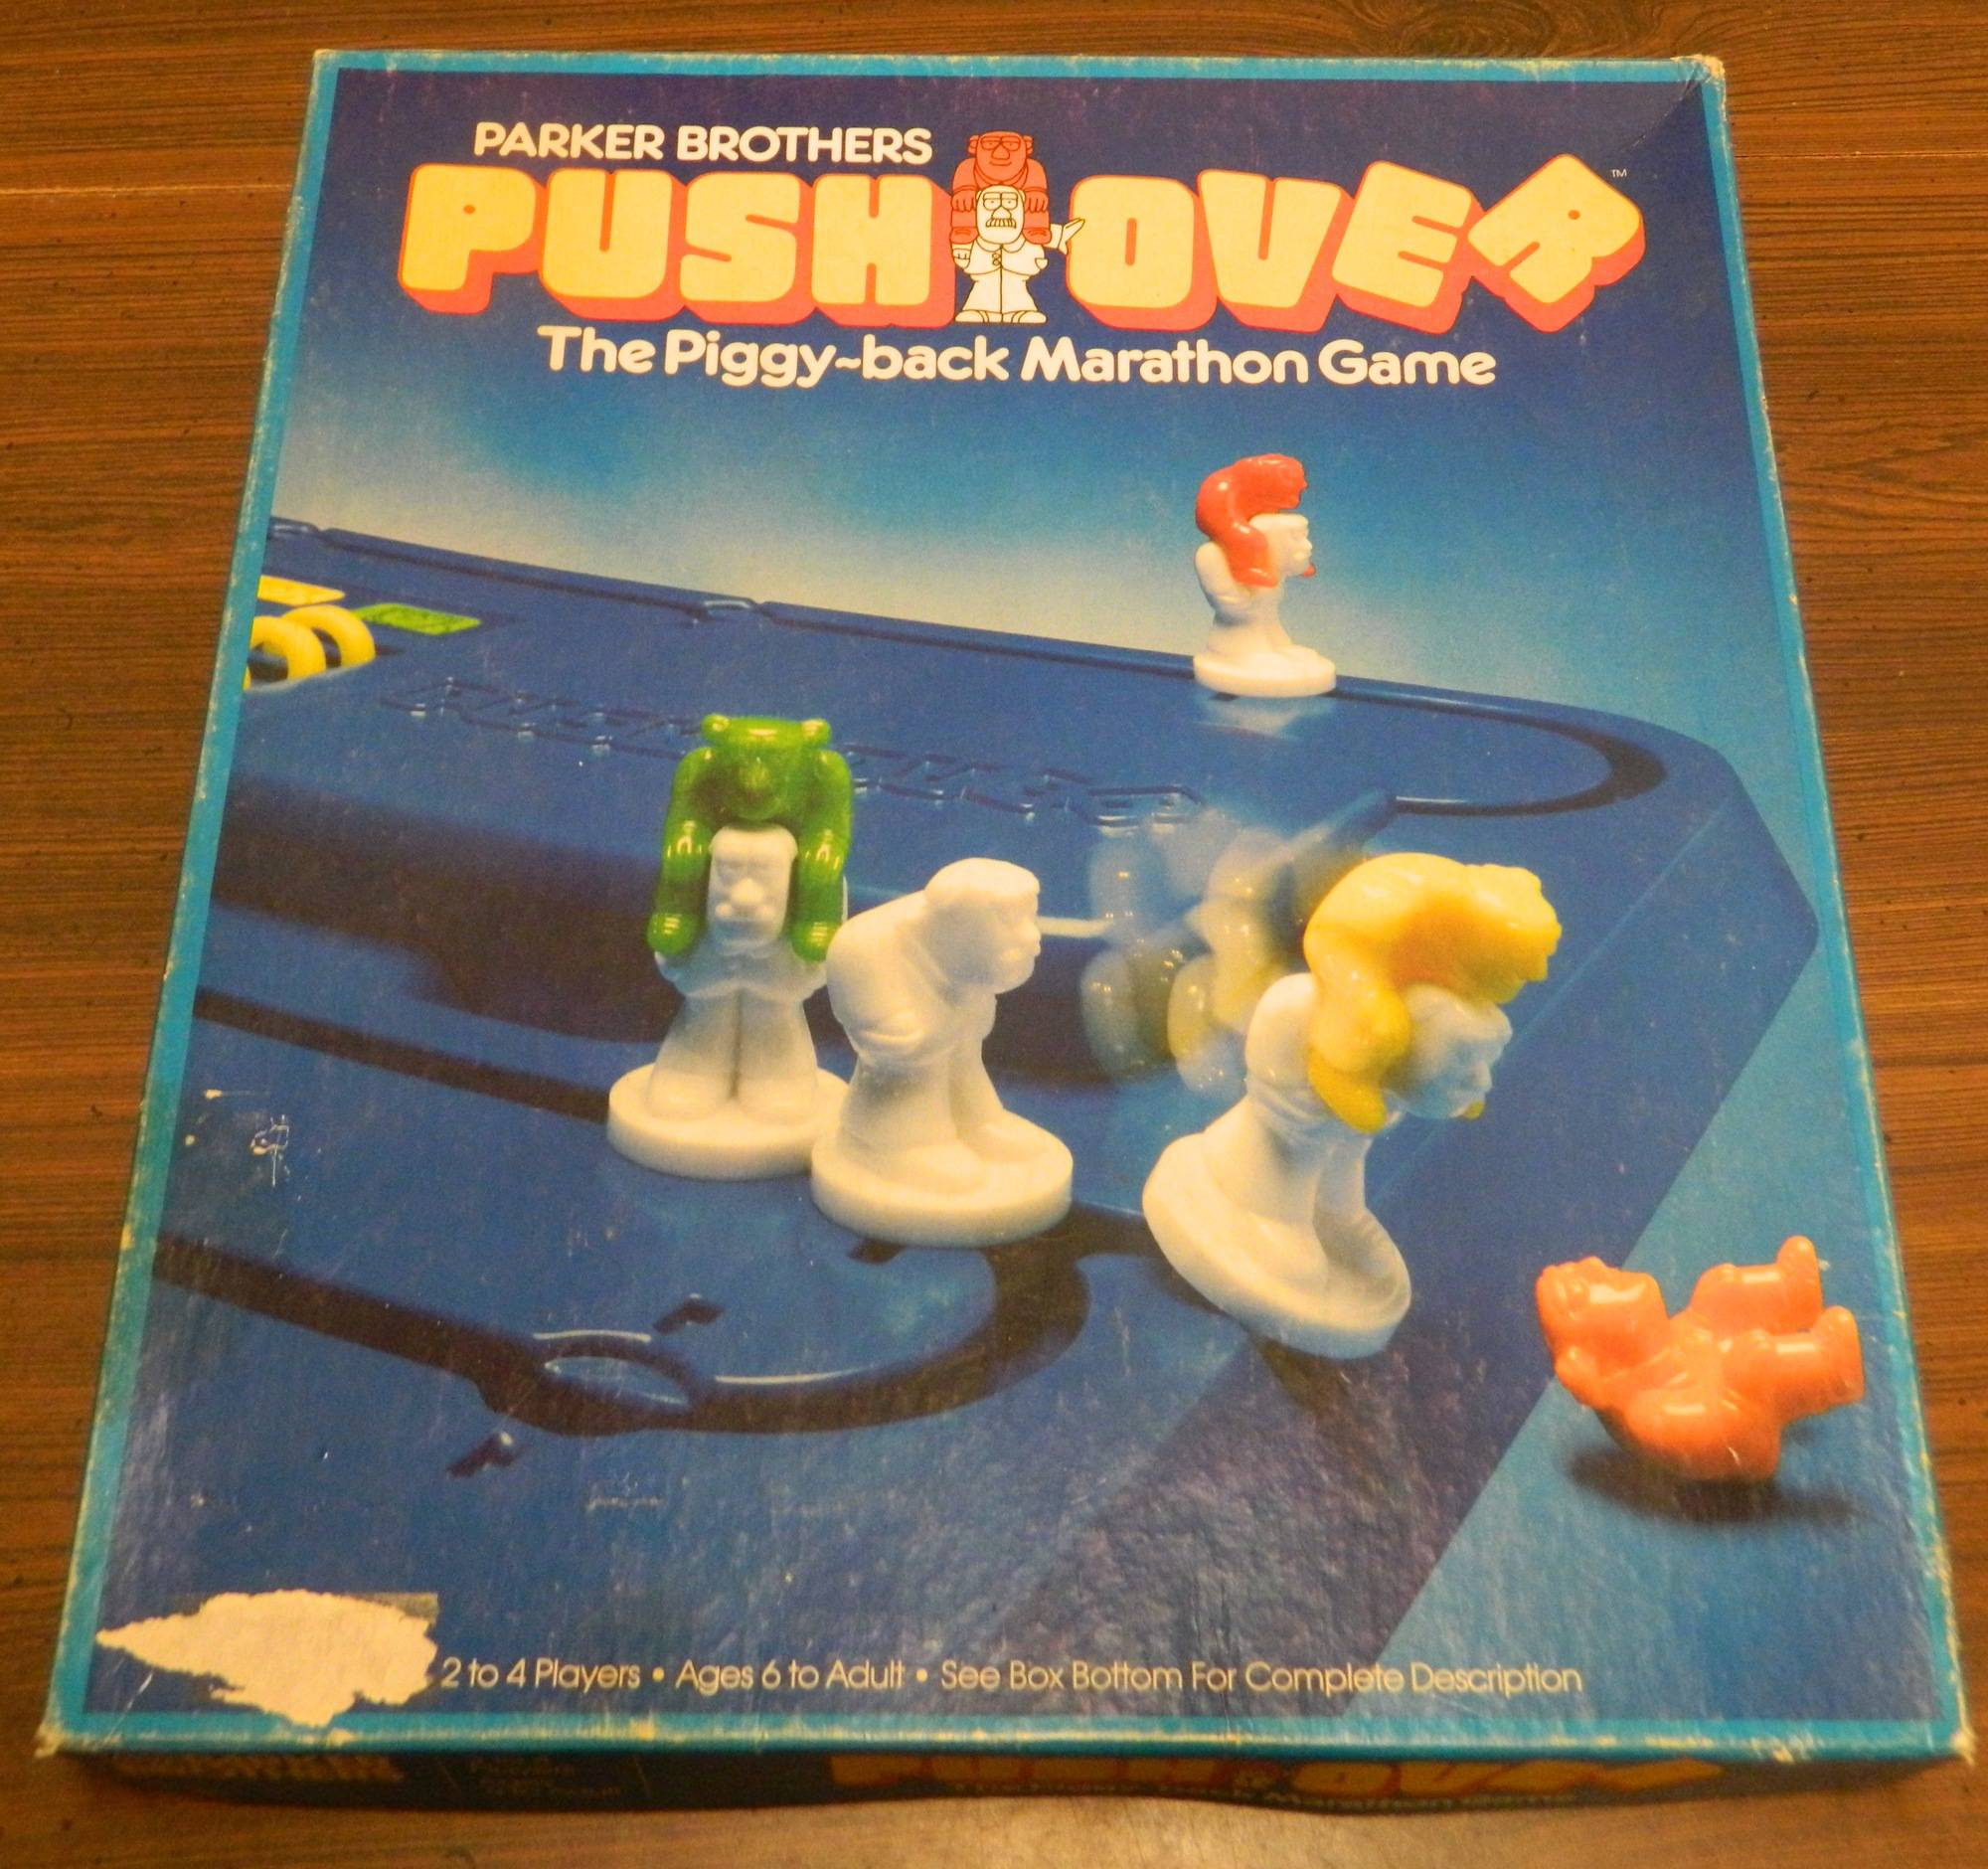 Push Over Board Game Review and Rules